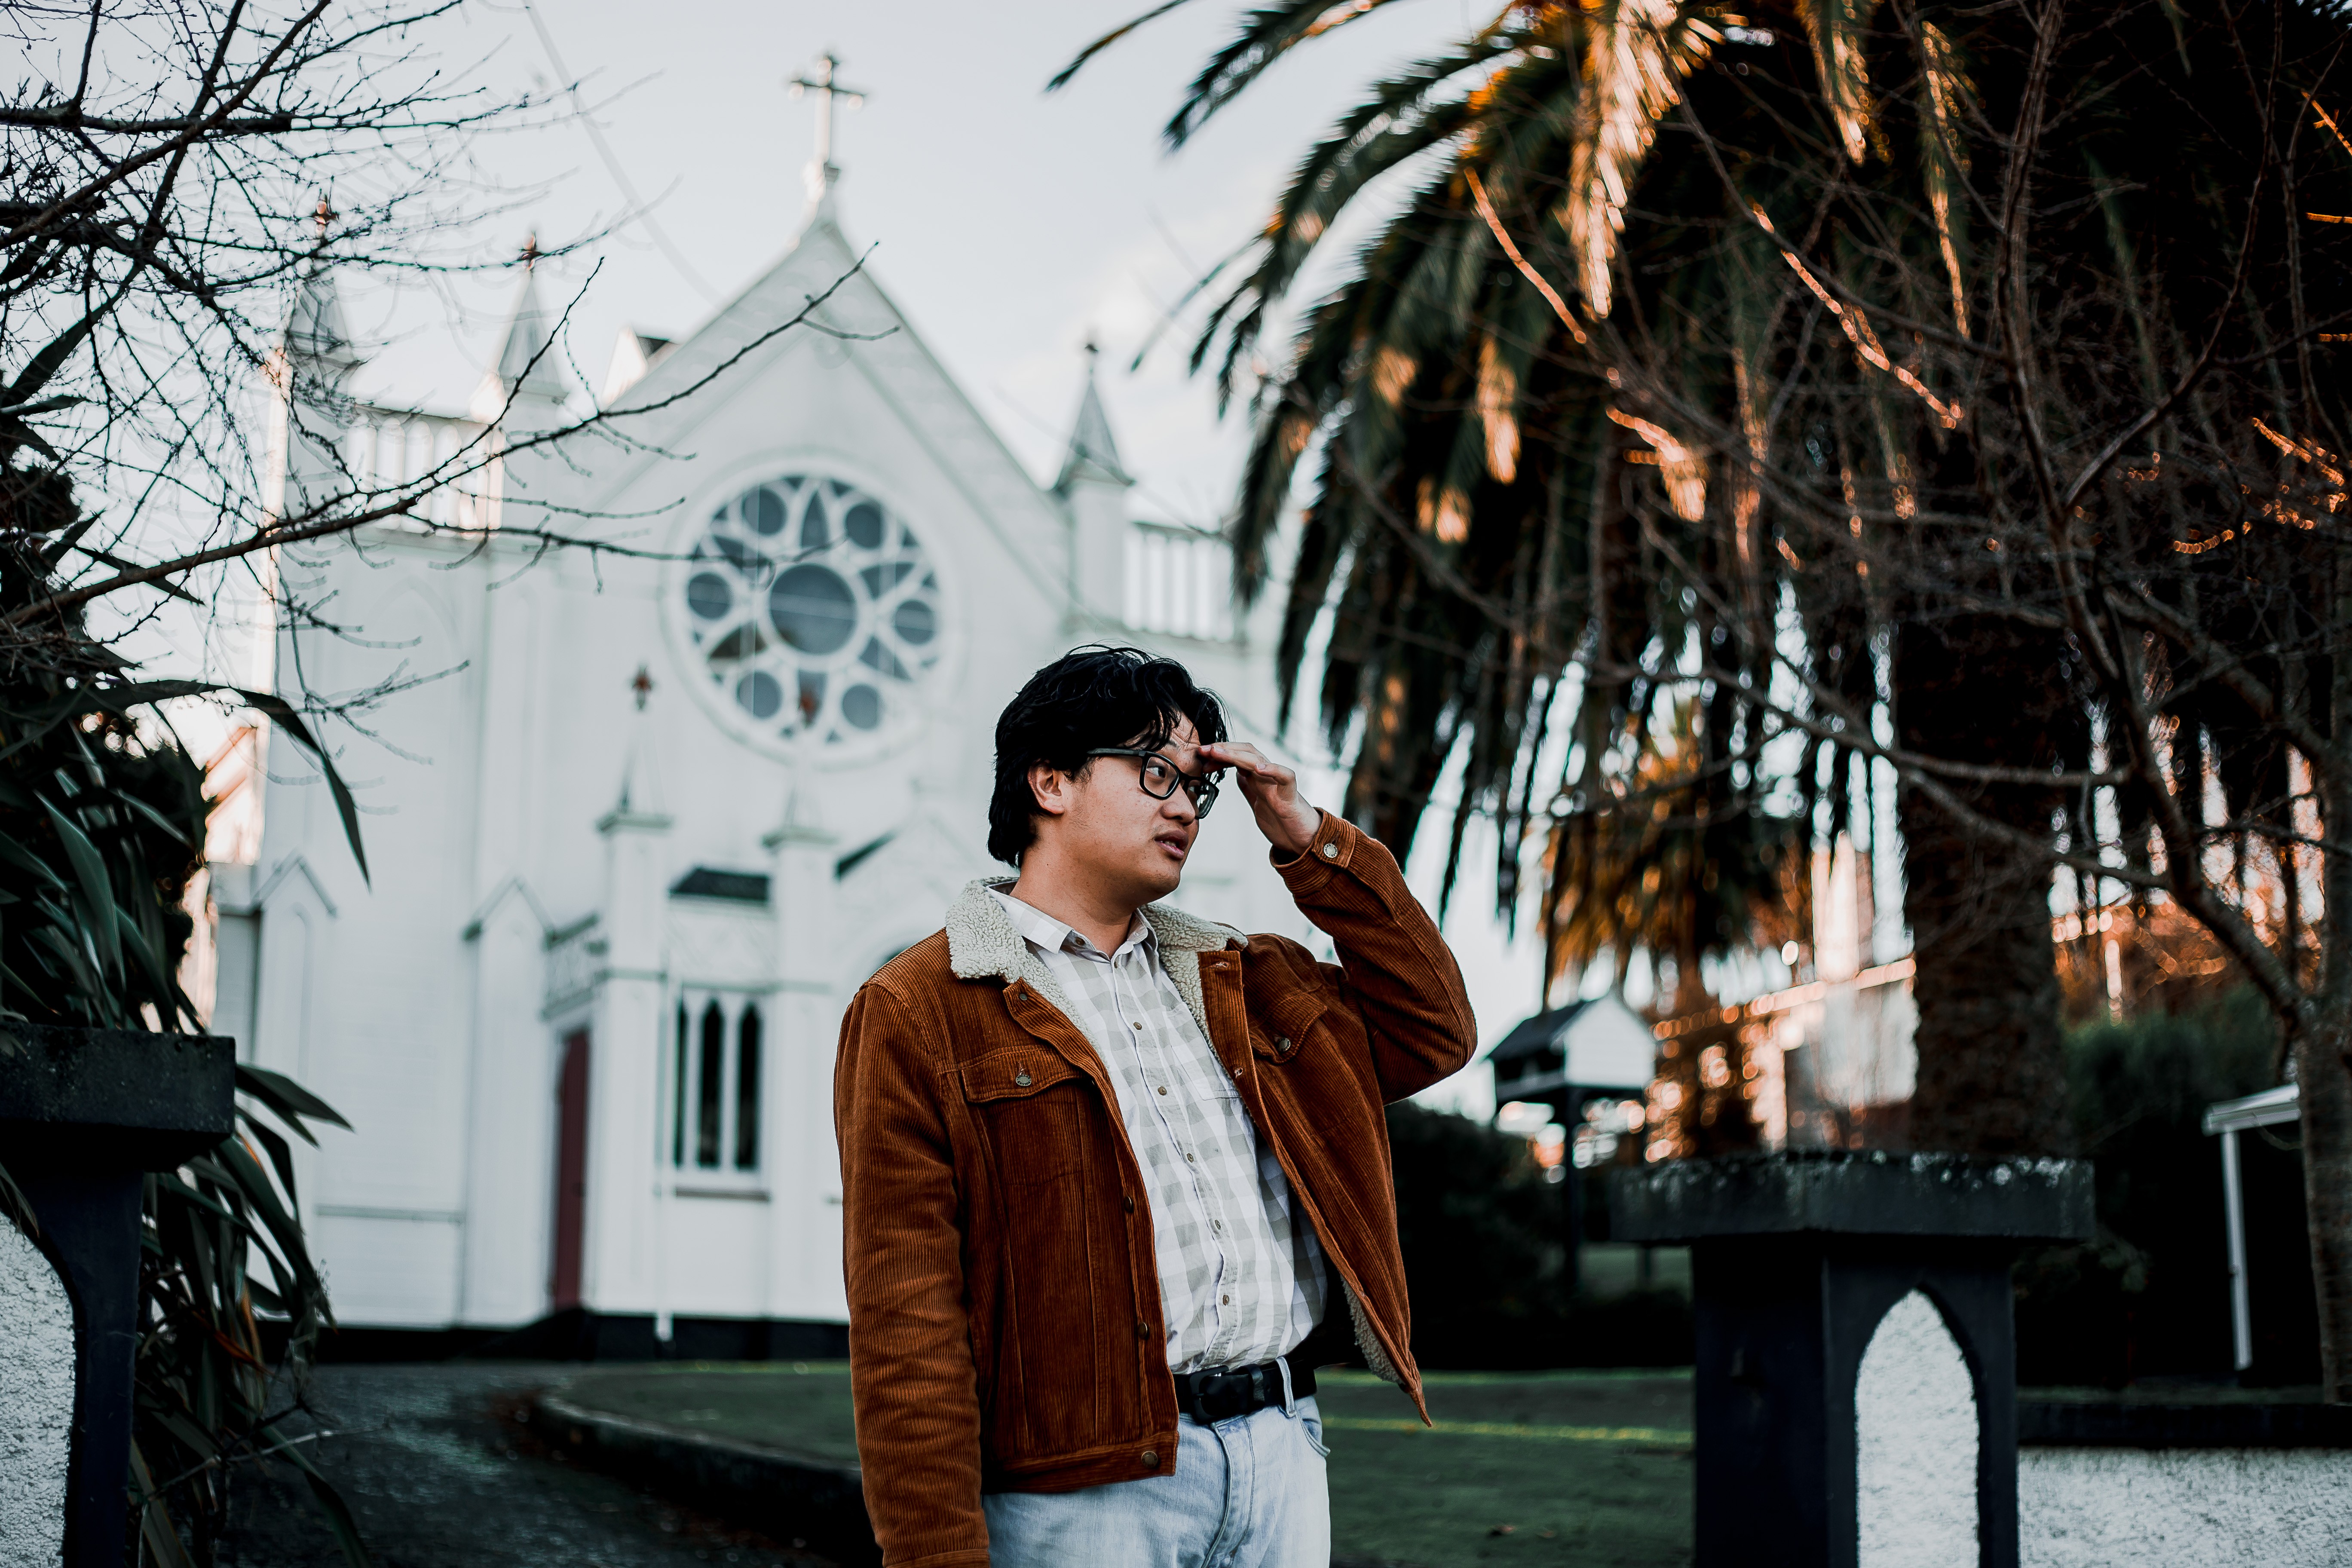 A man in a brown coat with dark wavy hair and glasses stands in front of a white church.